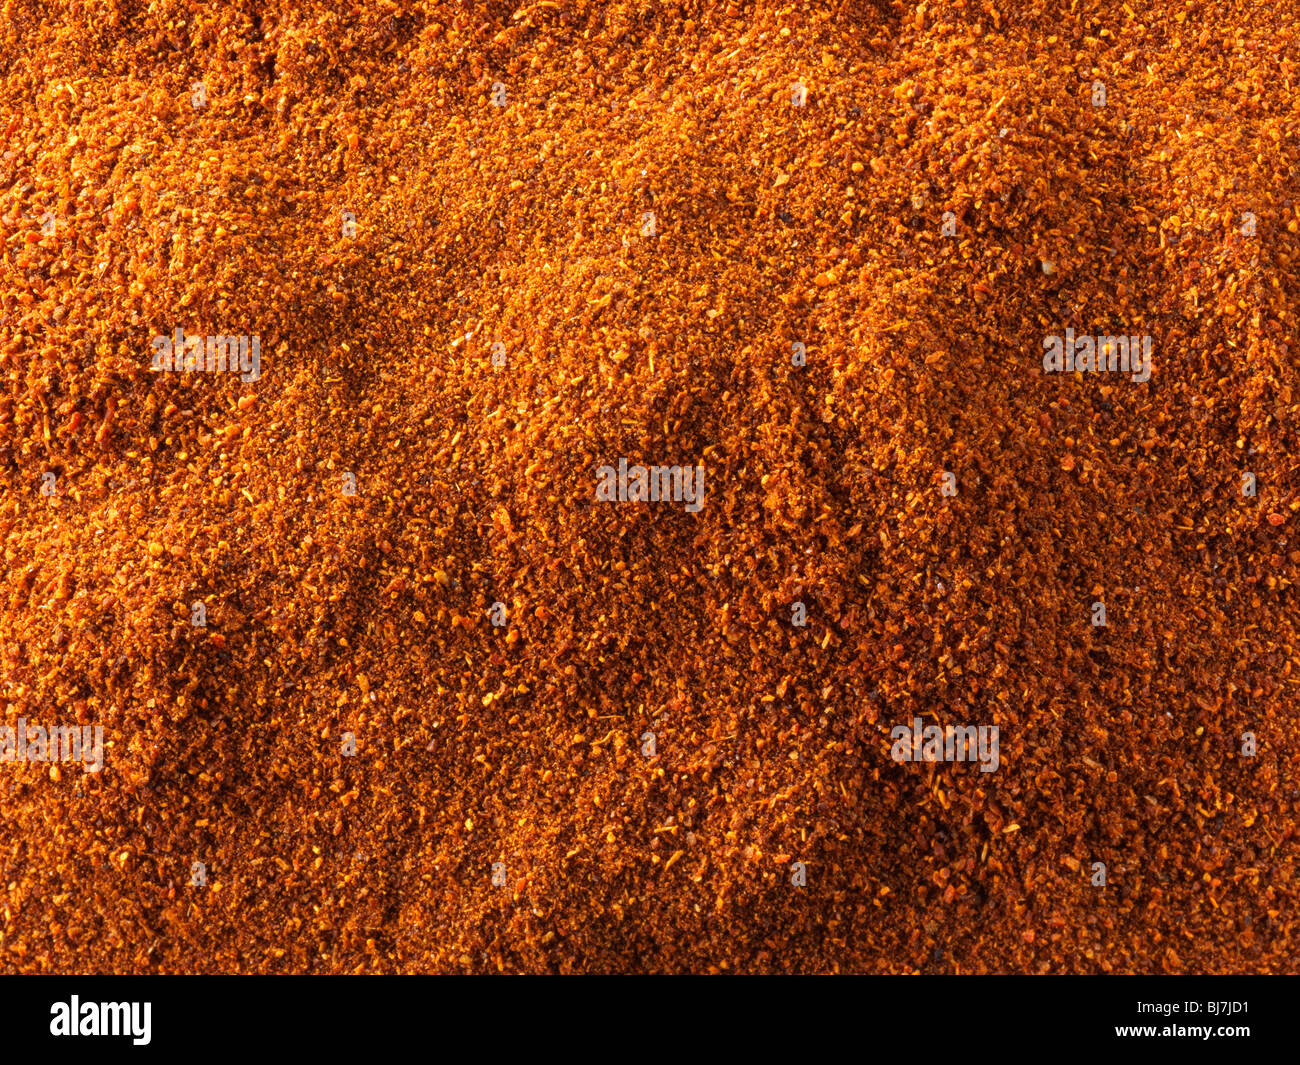 Cayenne pepper spices, close up full frame Stock Photo